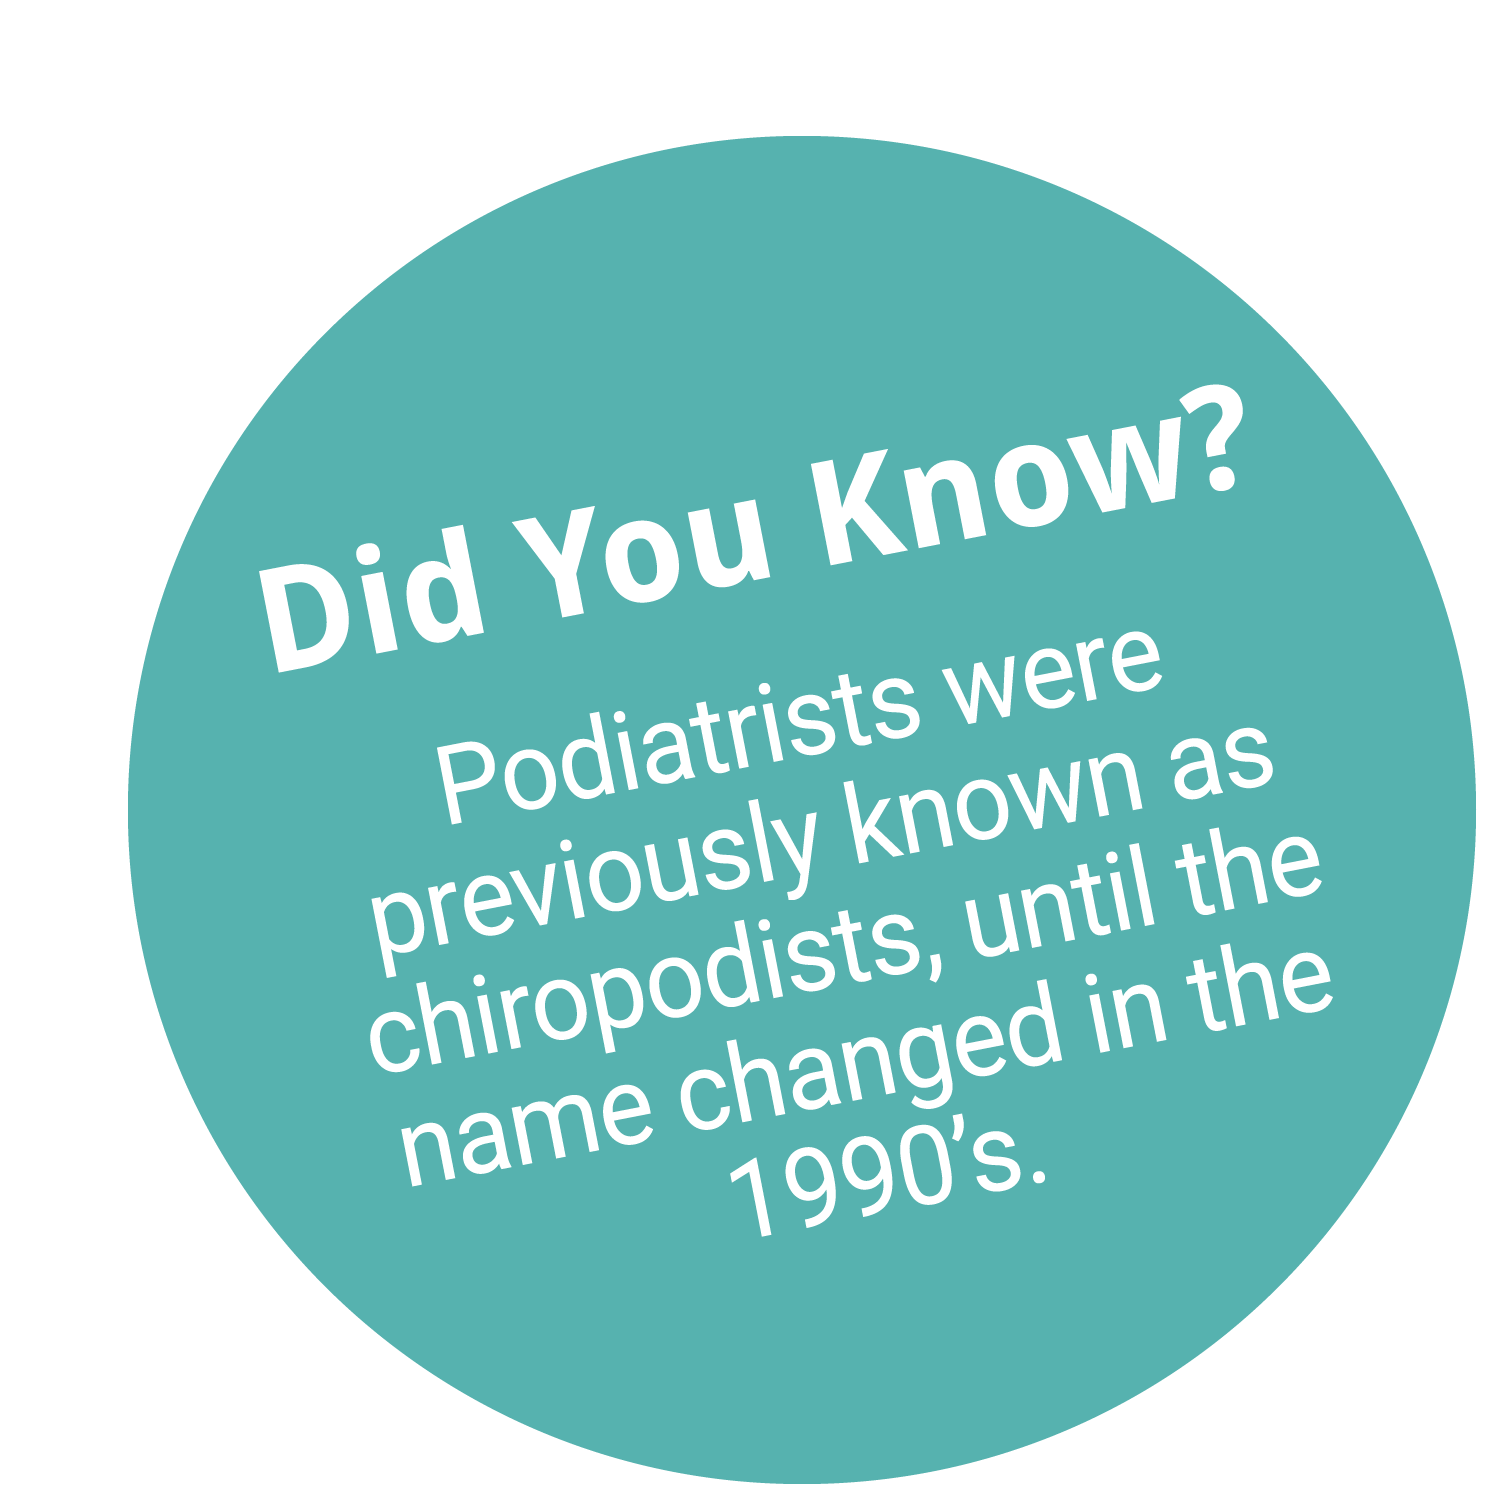 Did you know Podiatrists were previously called Chiropodists?